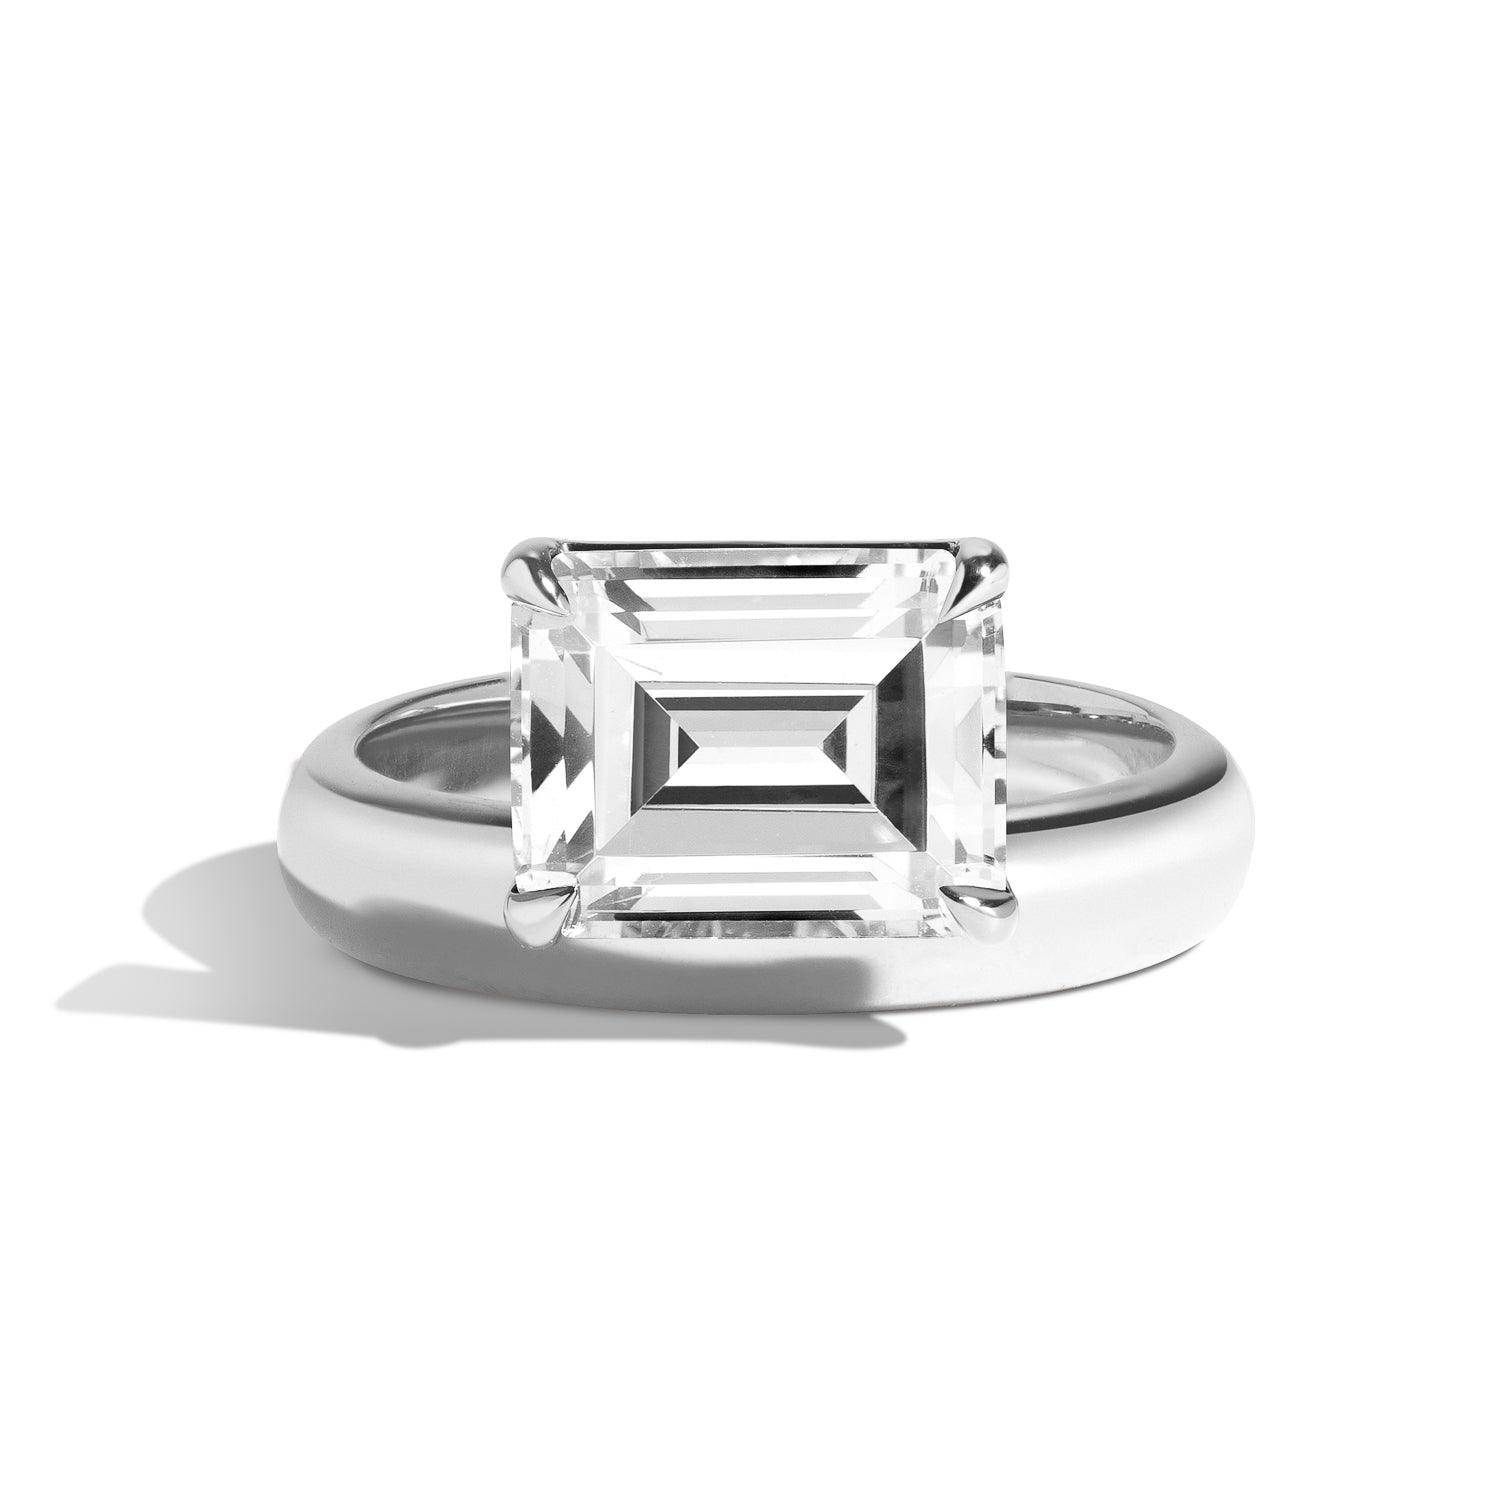 1.5 Carat Emerald Cut Solitaire Engagement Ring in White Gold over Ste —  kisnagems.co.uk